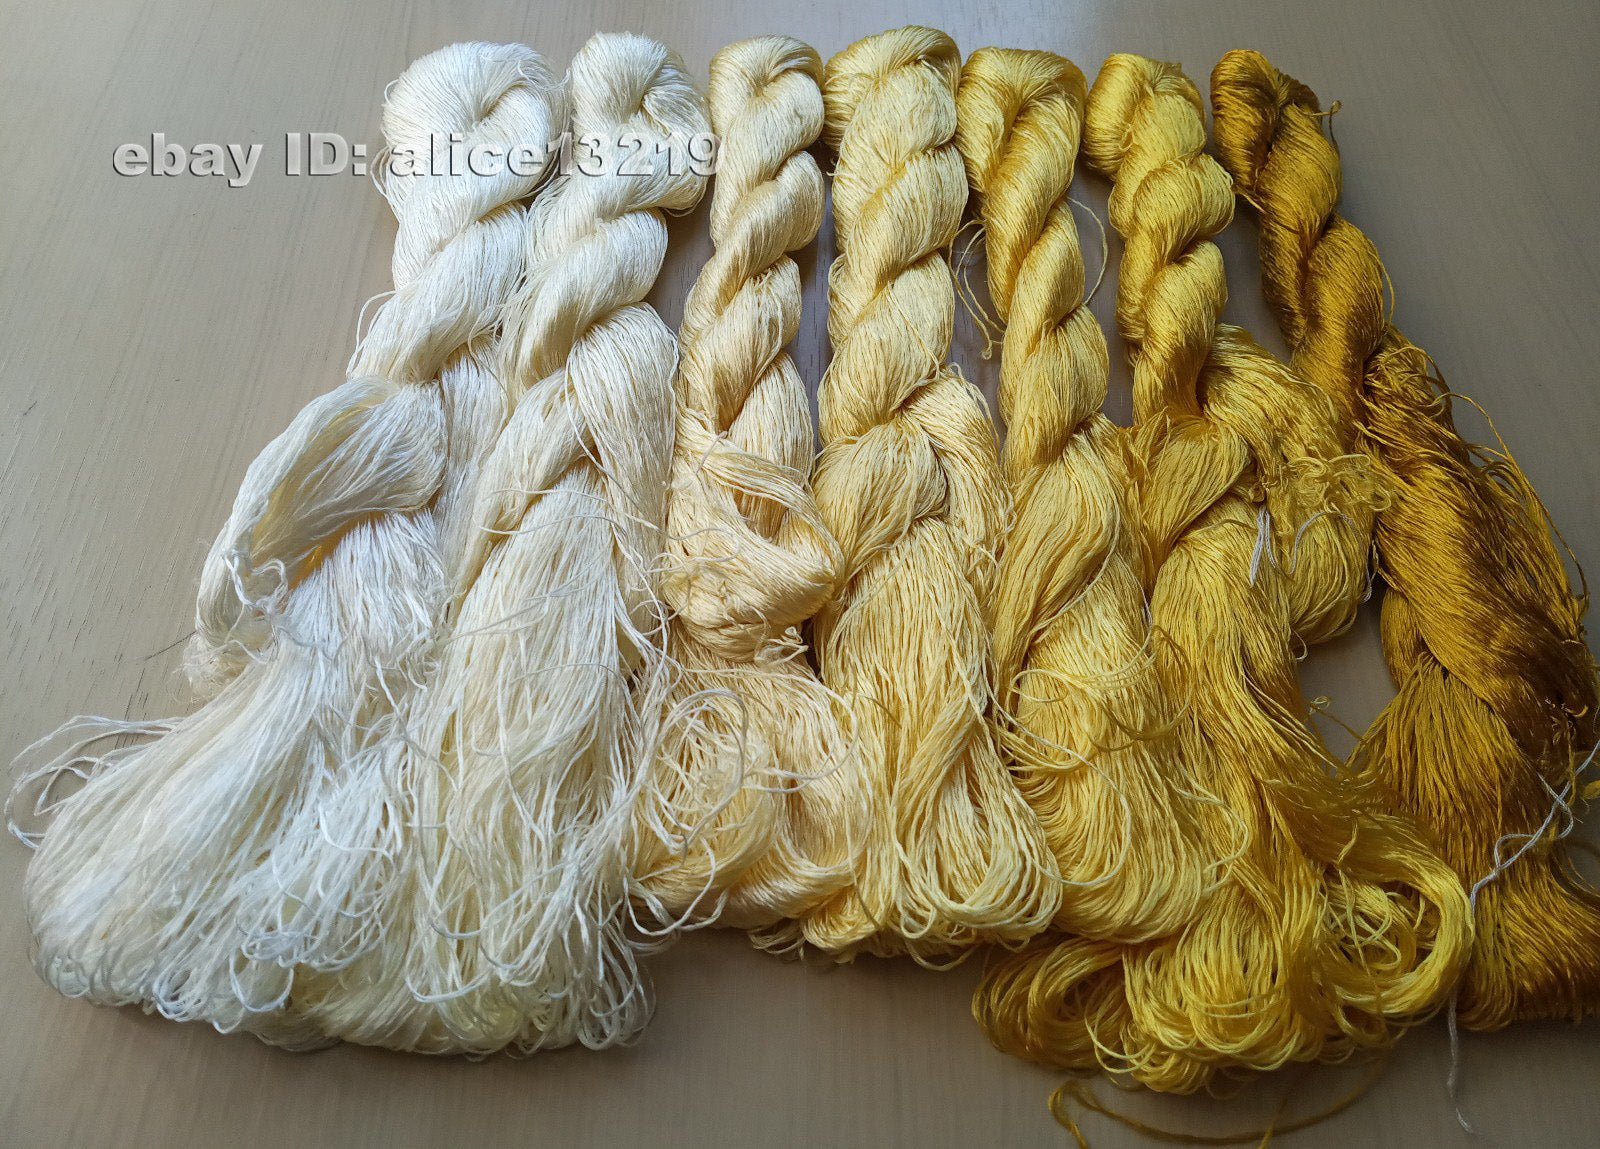 7bundles 100%real mulberry silk,hand-dyed embroidery silk floss/thread N17